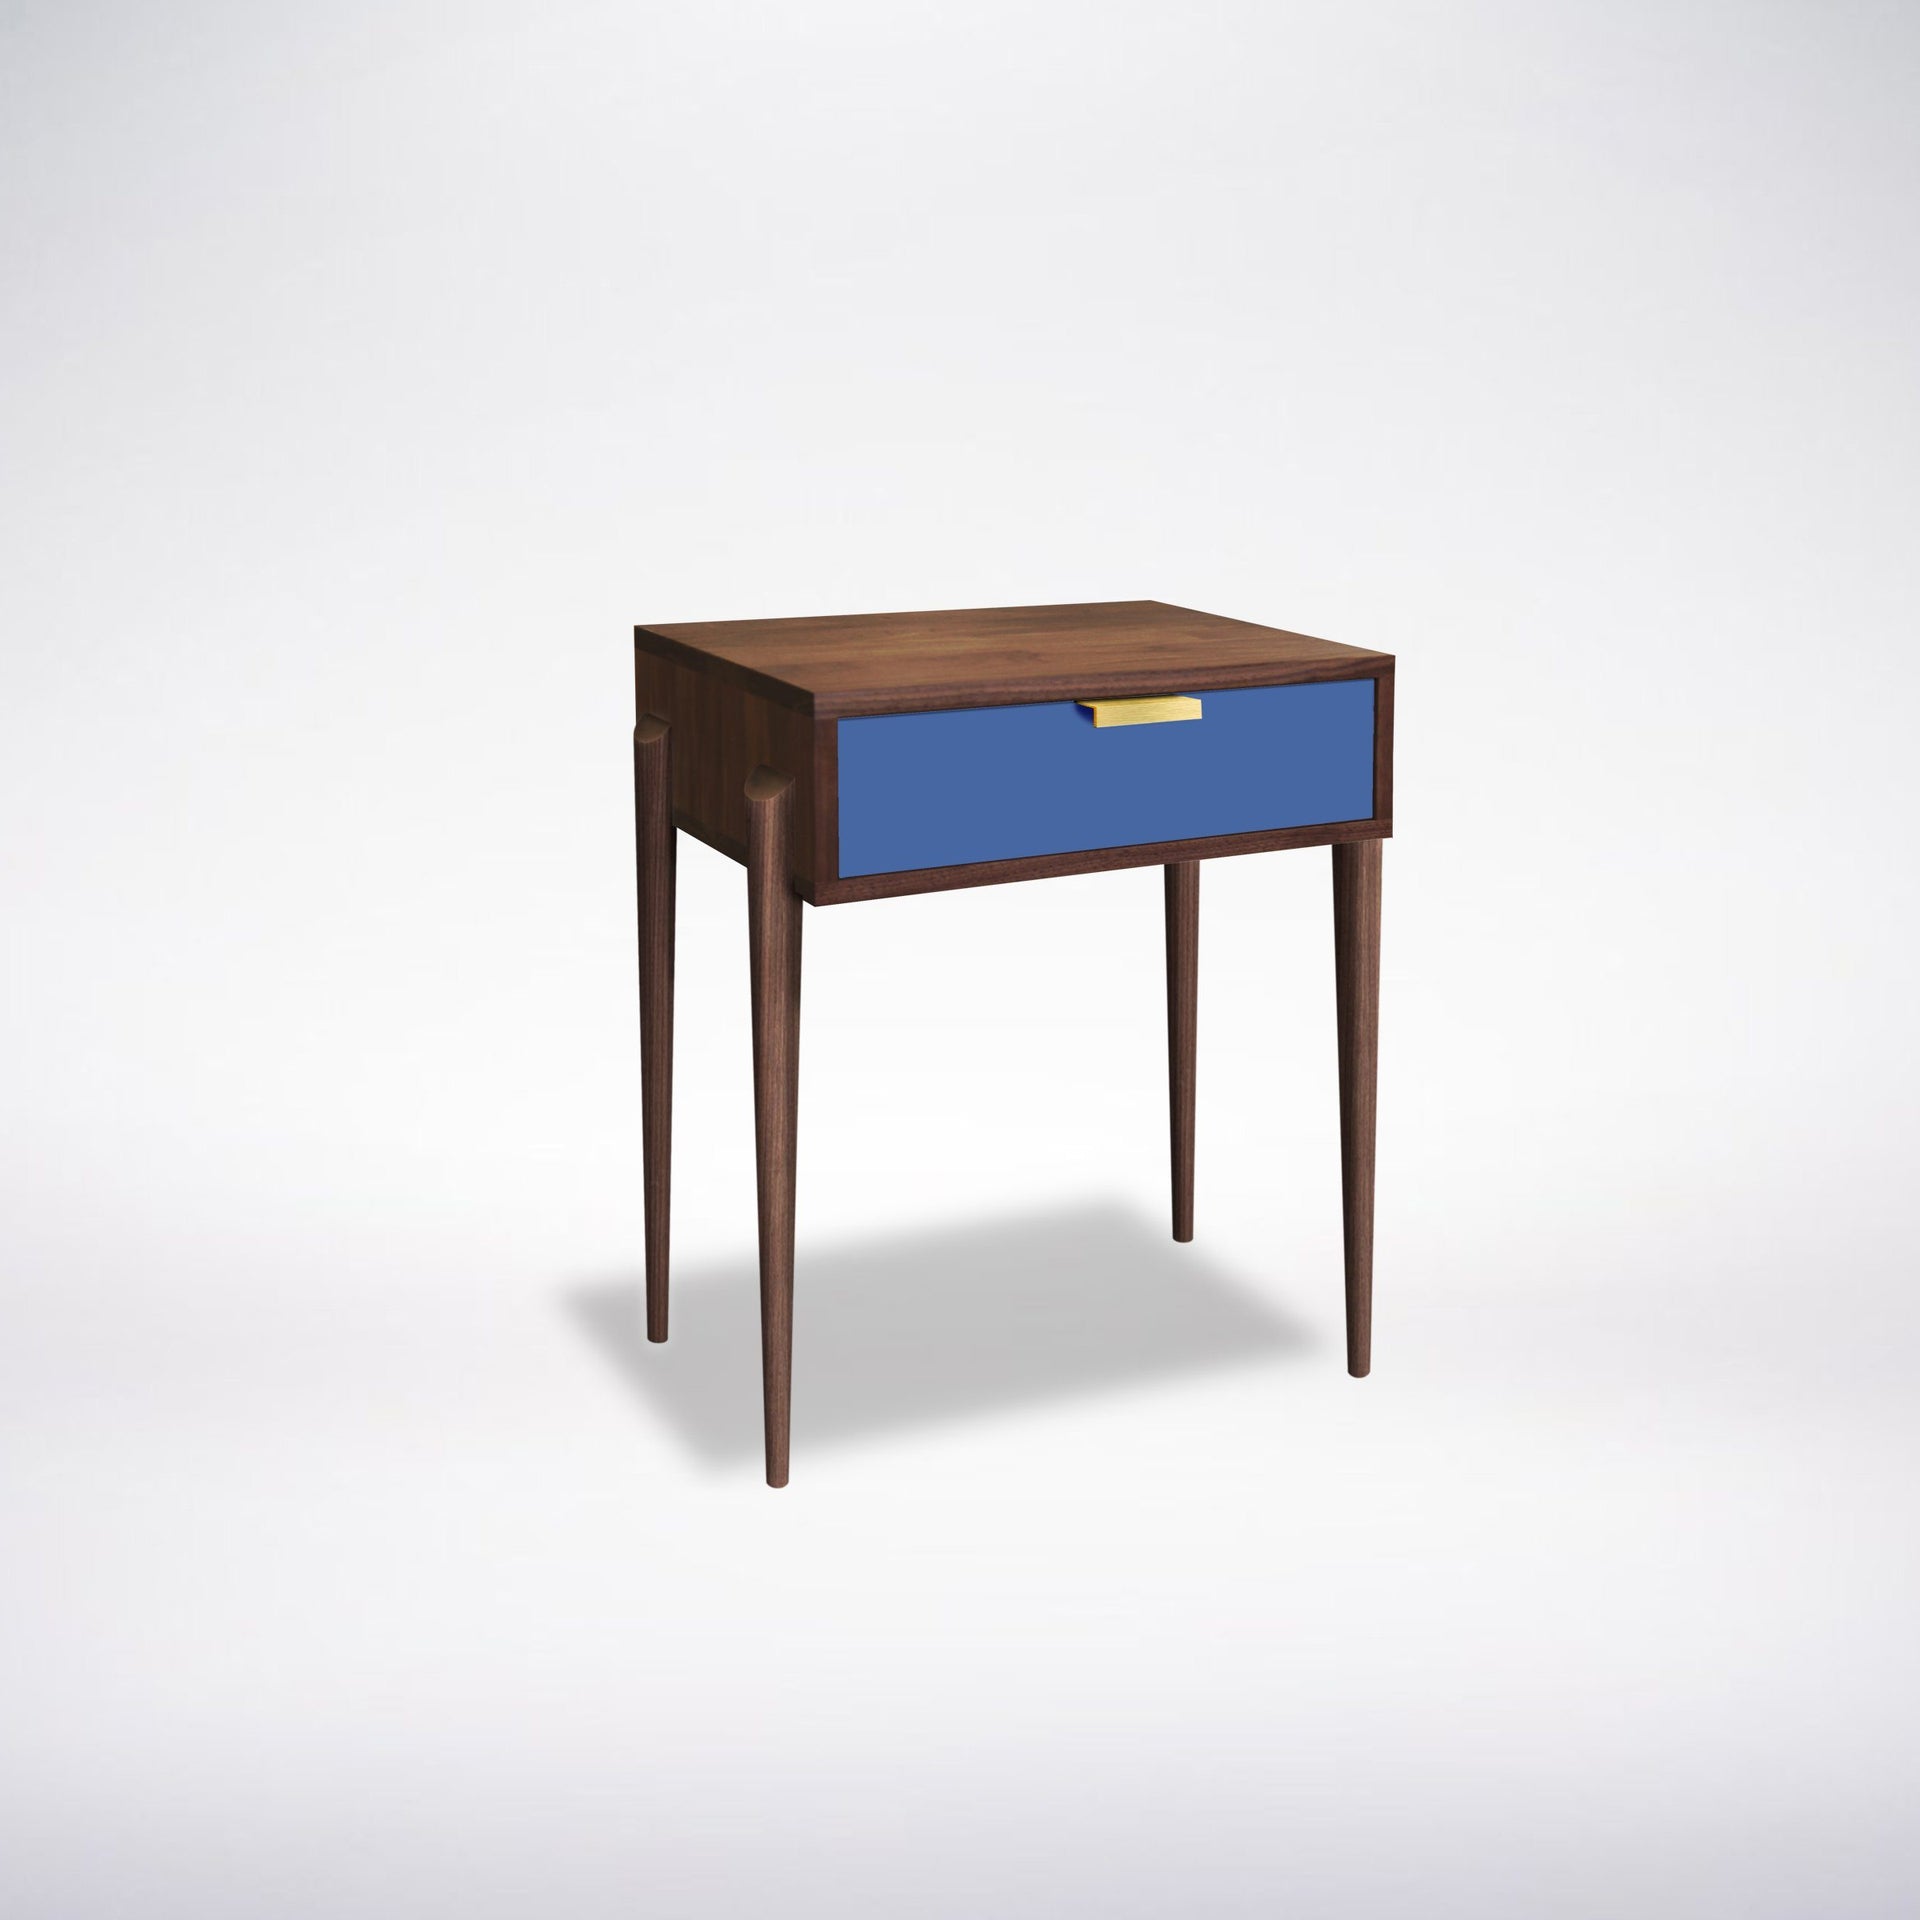 Solid wood side table with a blue drawer face